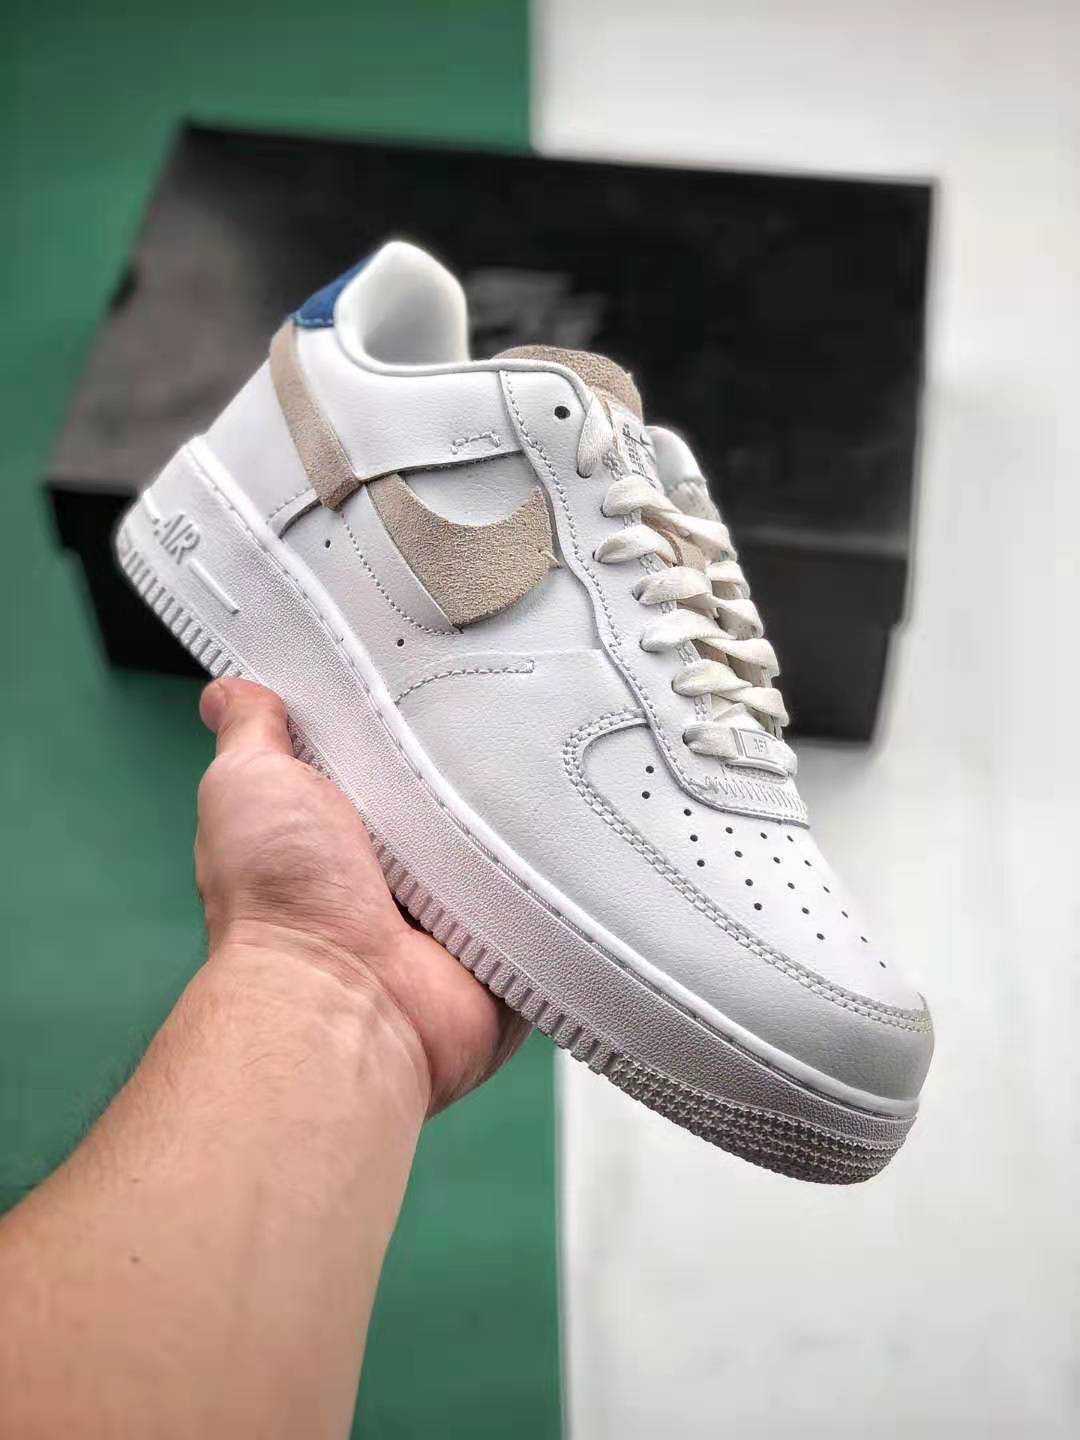 Nike Air Force 1 Low 'Vandalized' 898889-103 - Distinctive Style and Unmatched Comfort